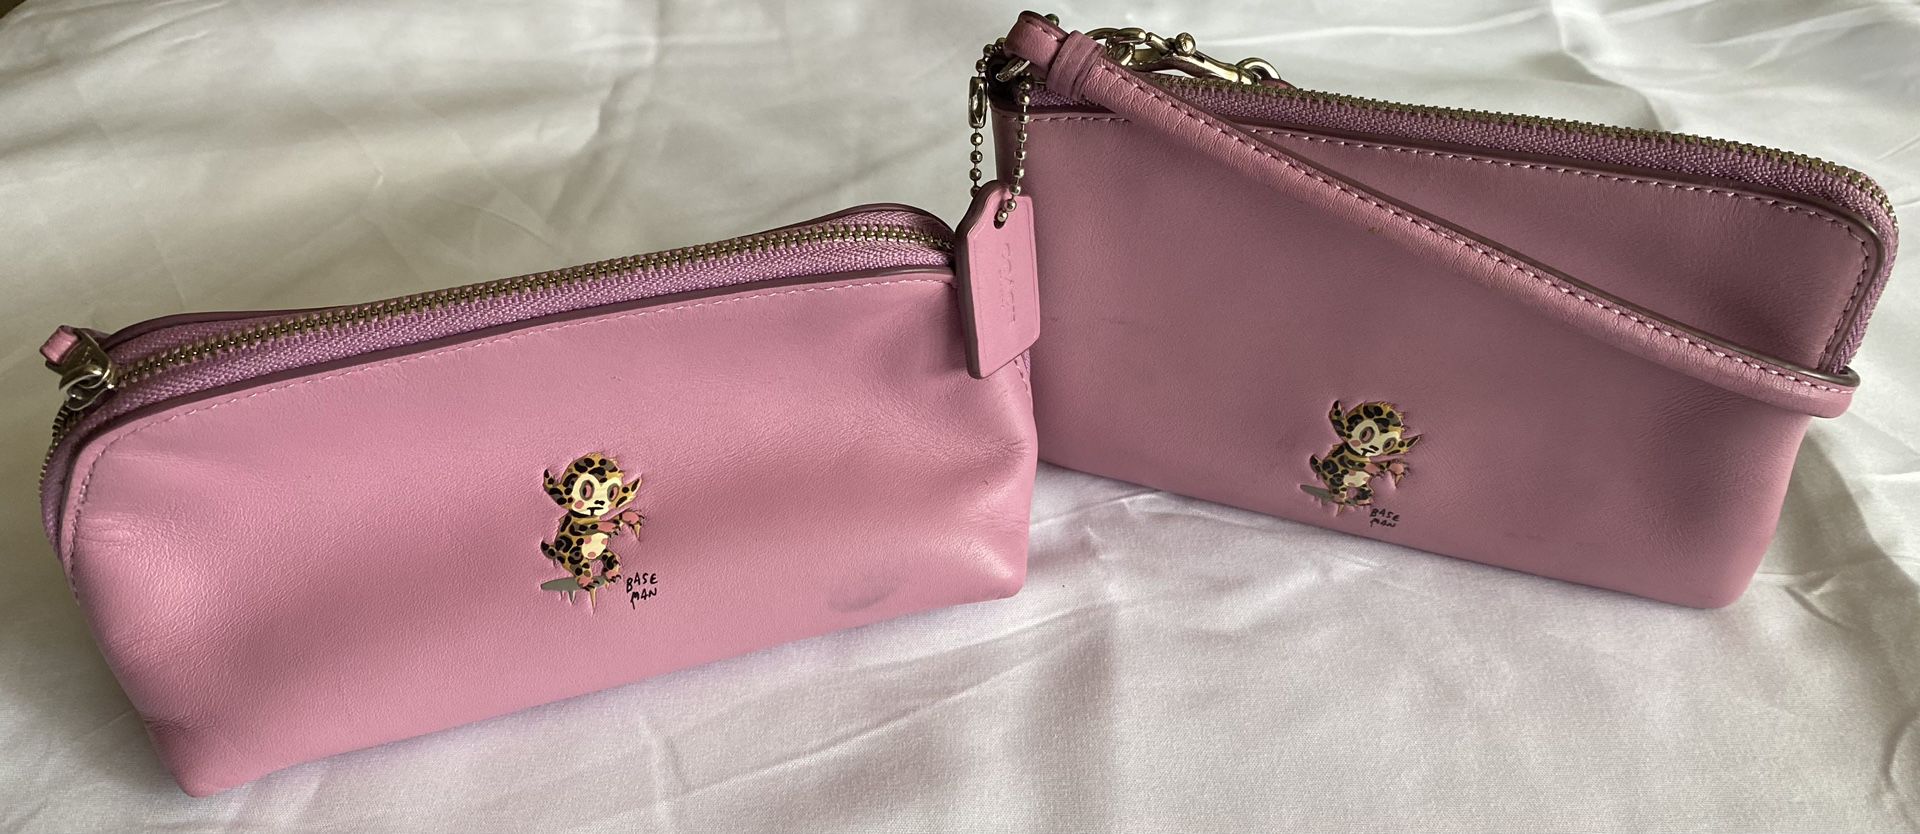 Limited Edition Coach X Baseman “Buster” Marshmallow Pink